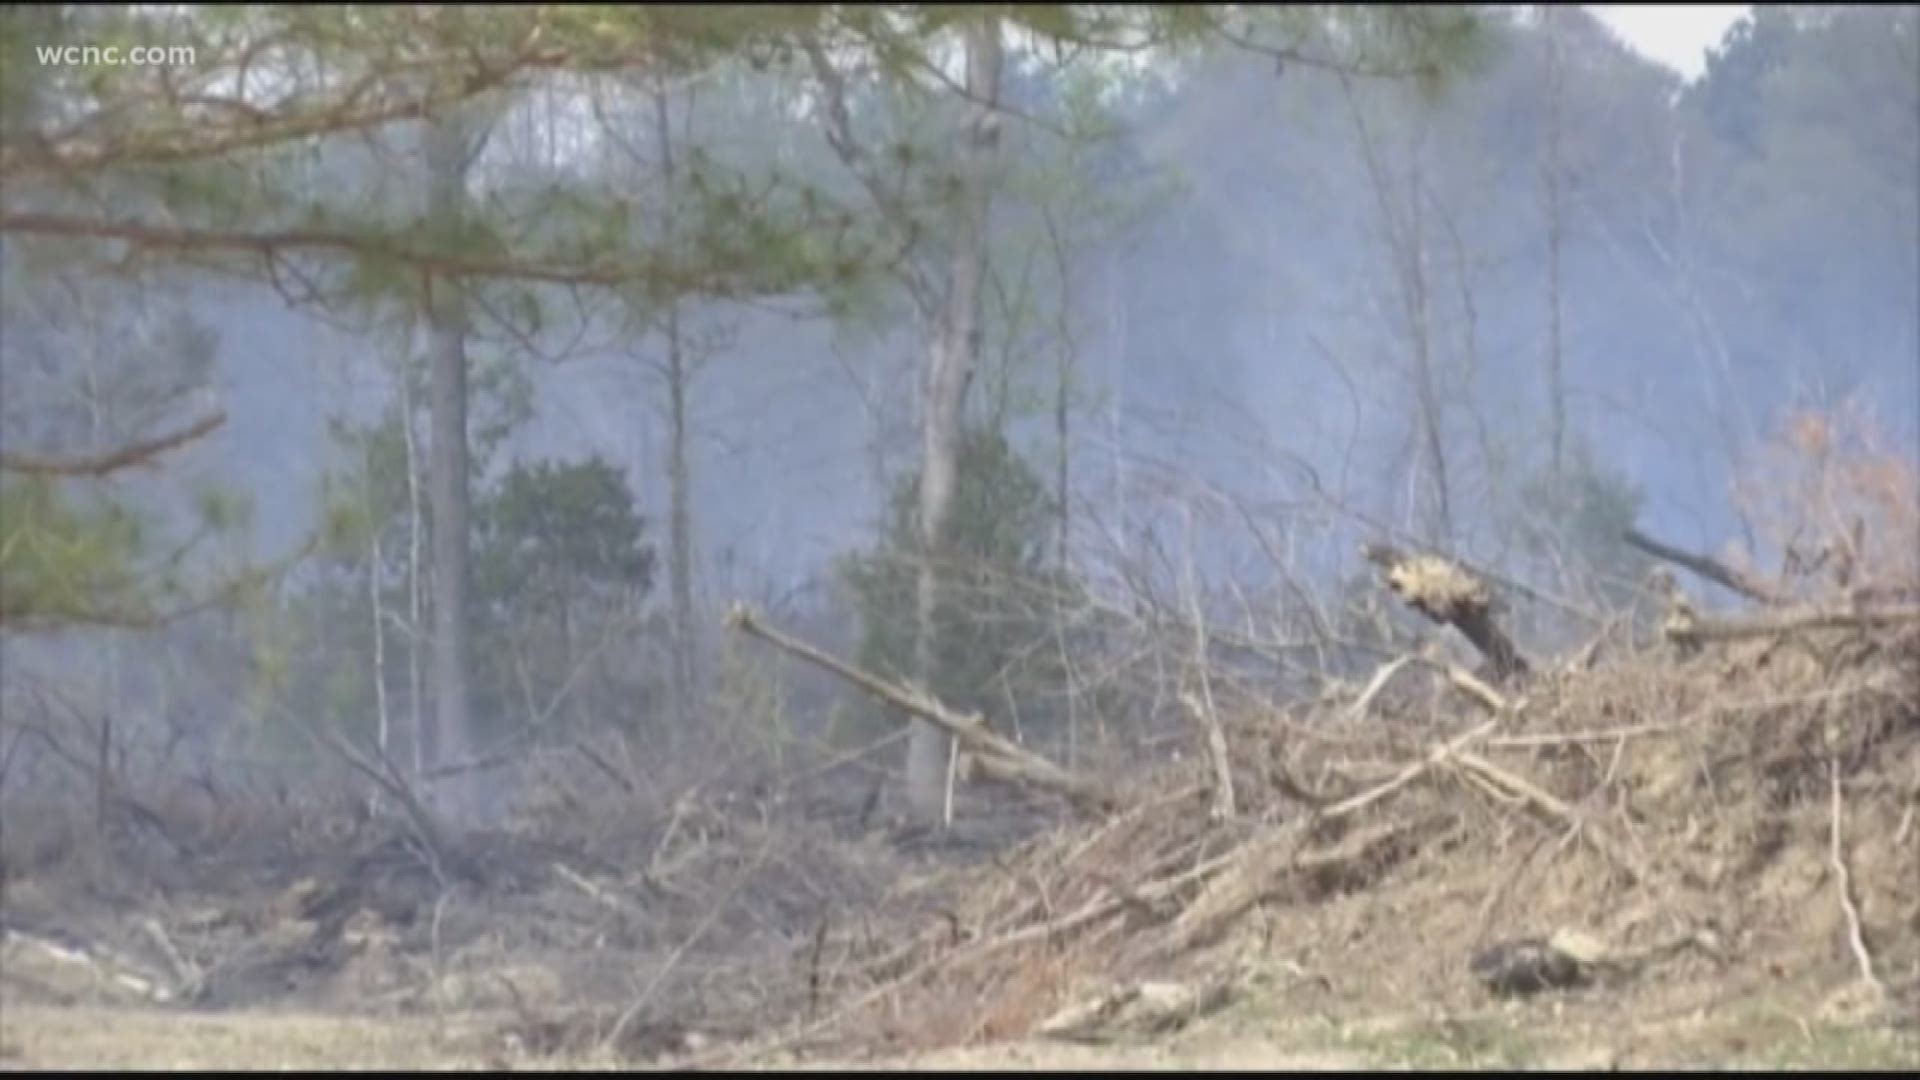 Firefighters are working to control the flames on Kiser Road.